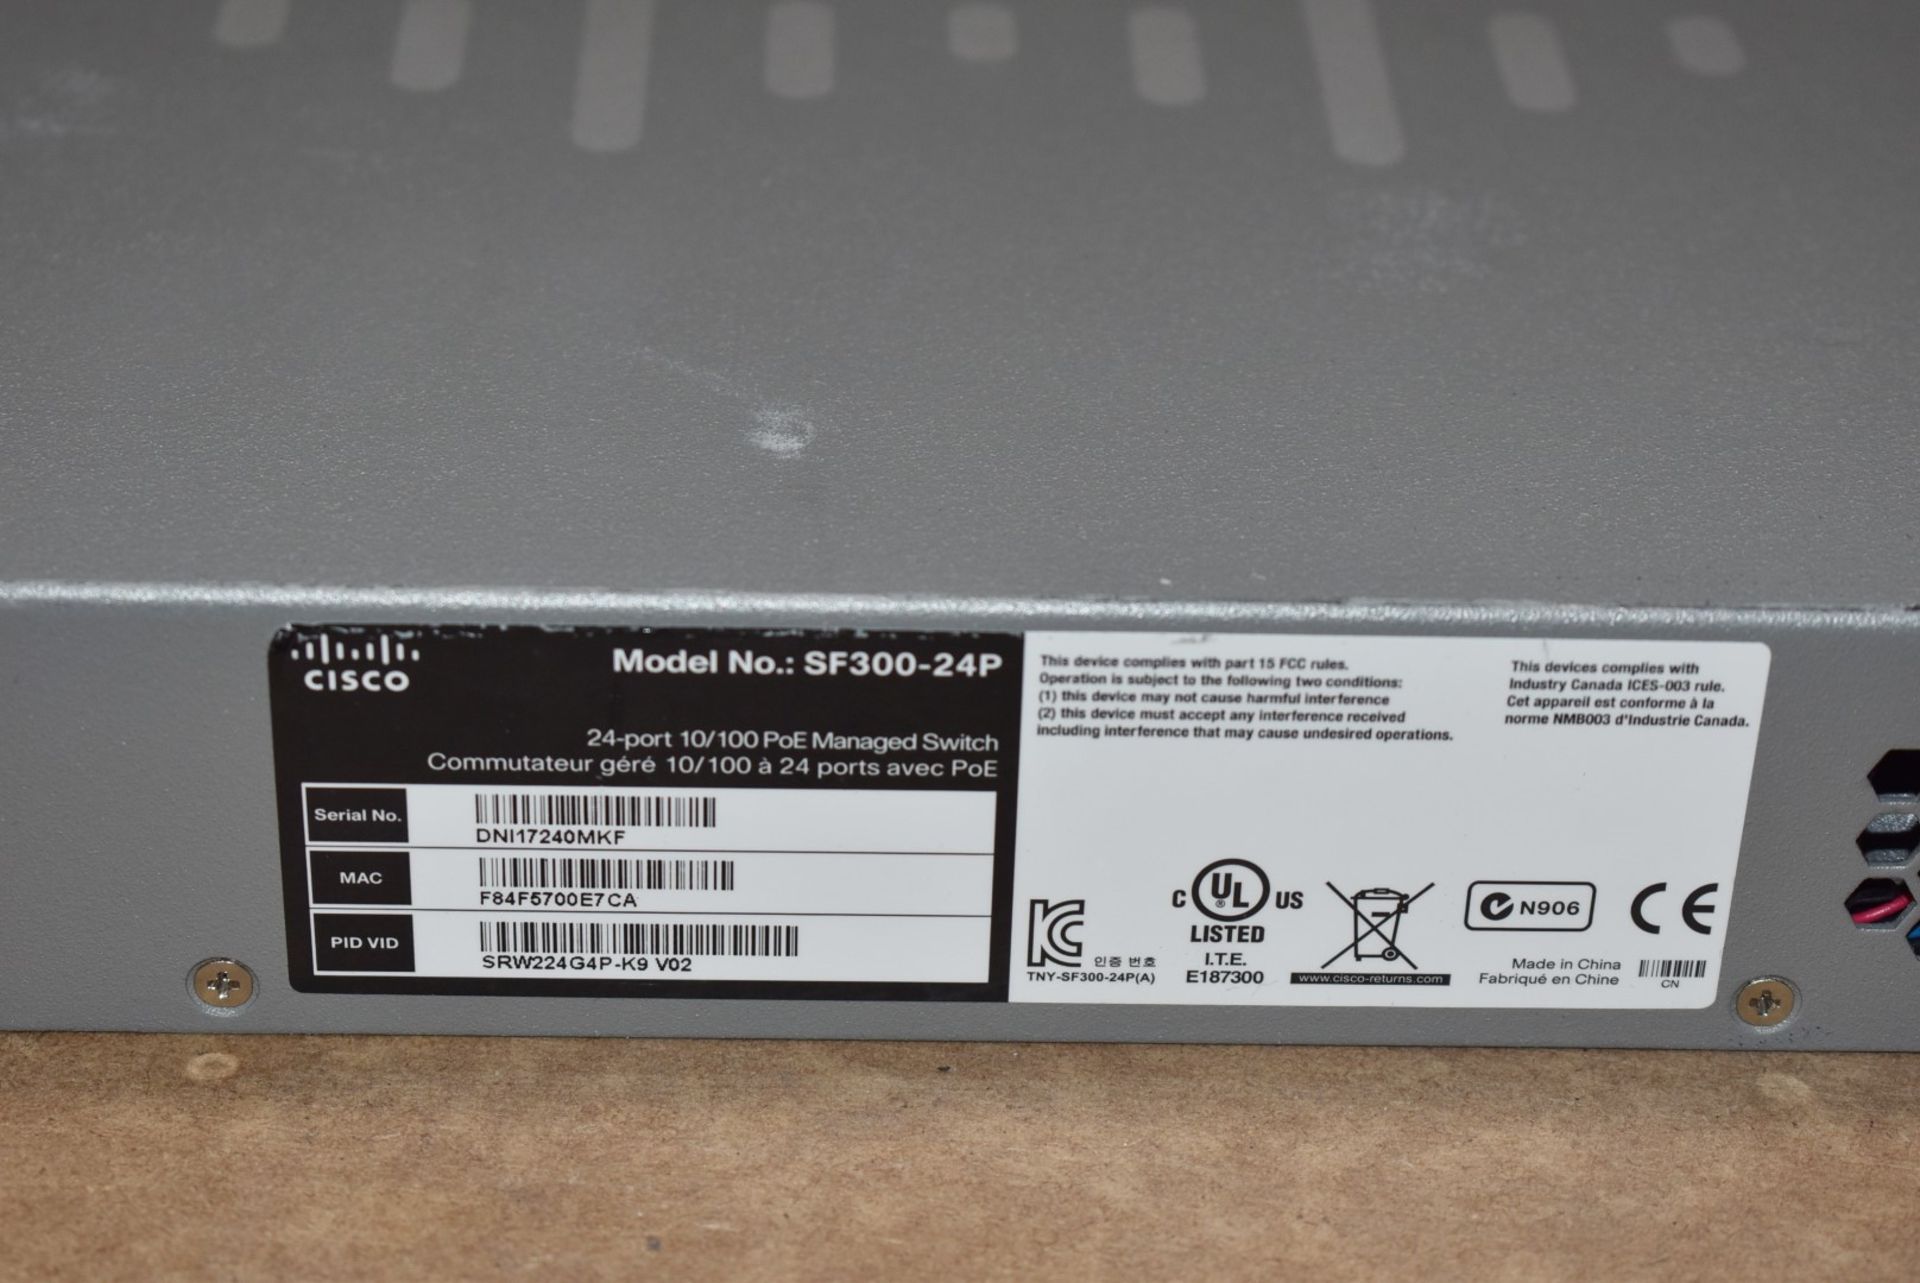 1 x Cisco SF300-24P 24-Port 10/100 PoE Managed Switch - Includes Power Cable - Ref: MPC156 CA - - Image 9 of 9